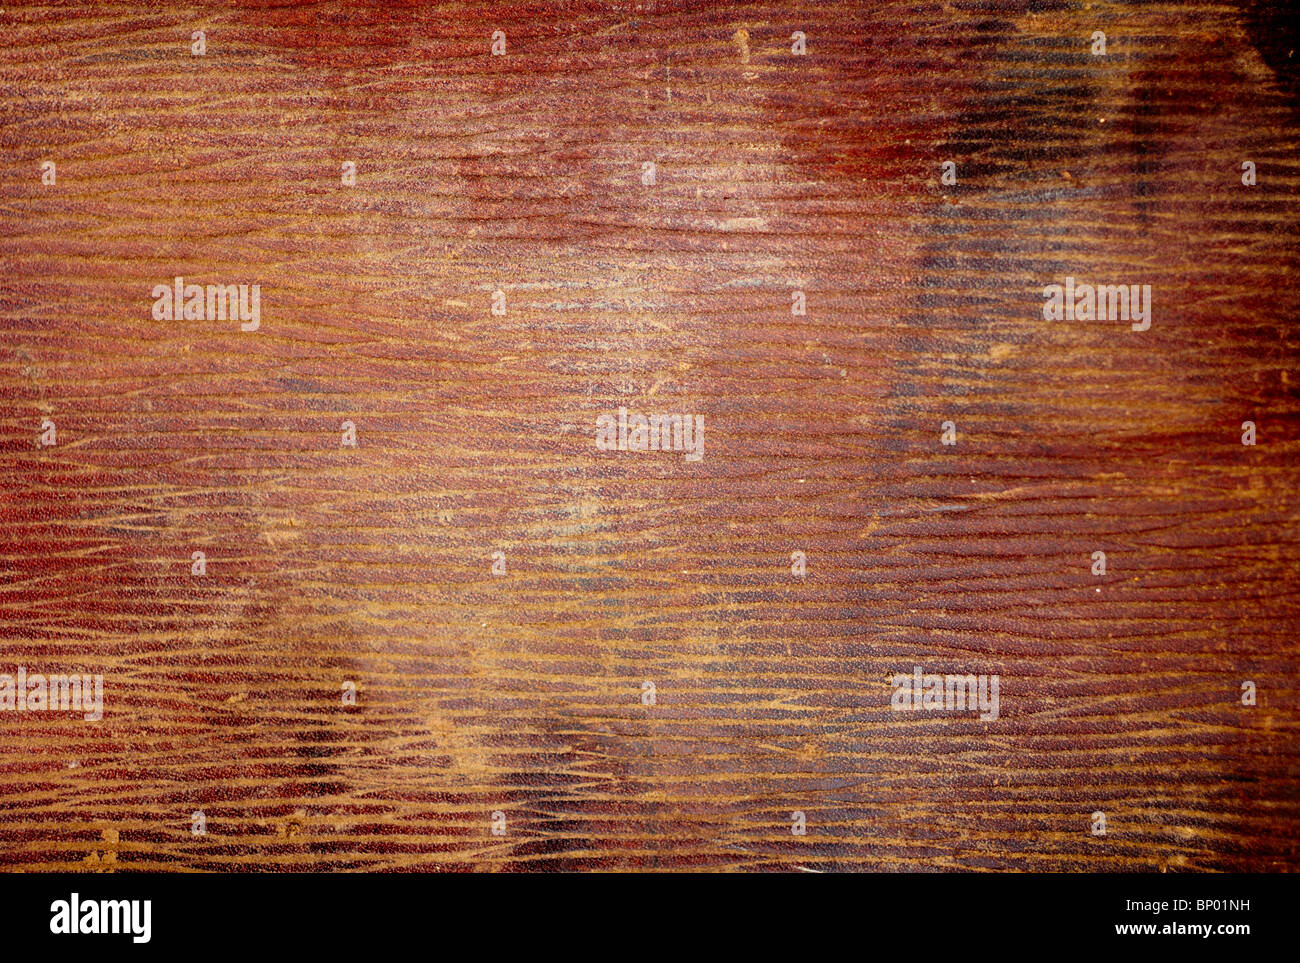 Dark brown old weathered leather. Abstract grunge colorful background. Stock Photo